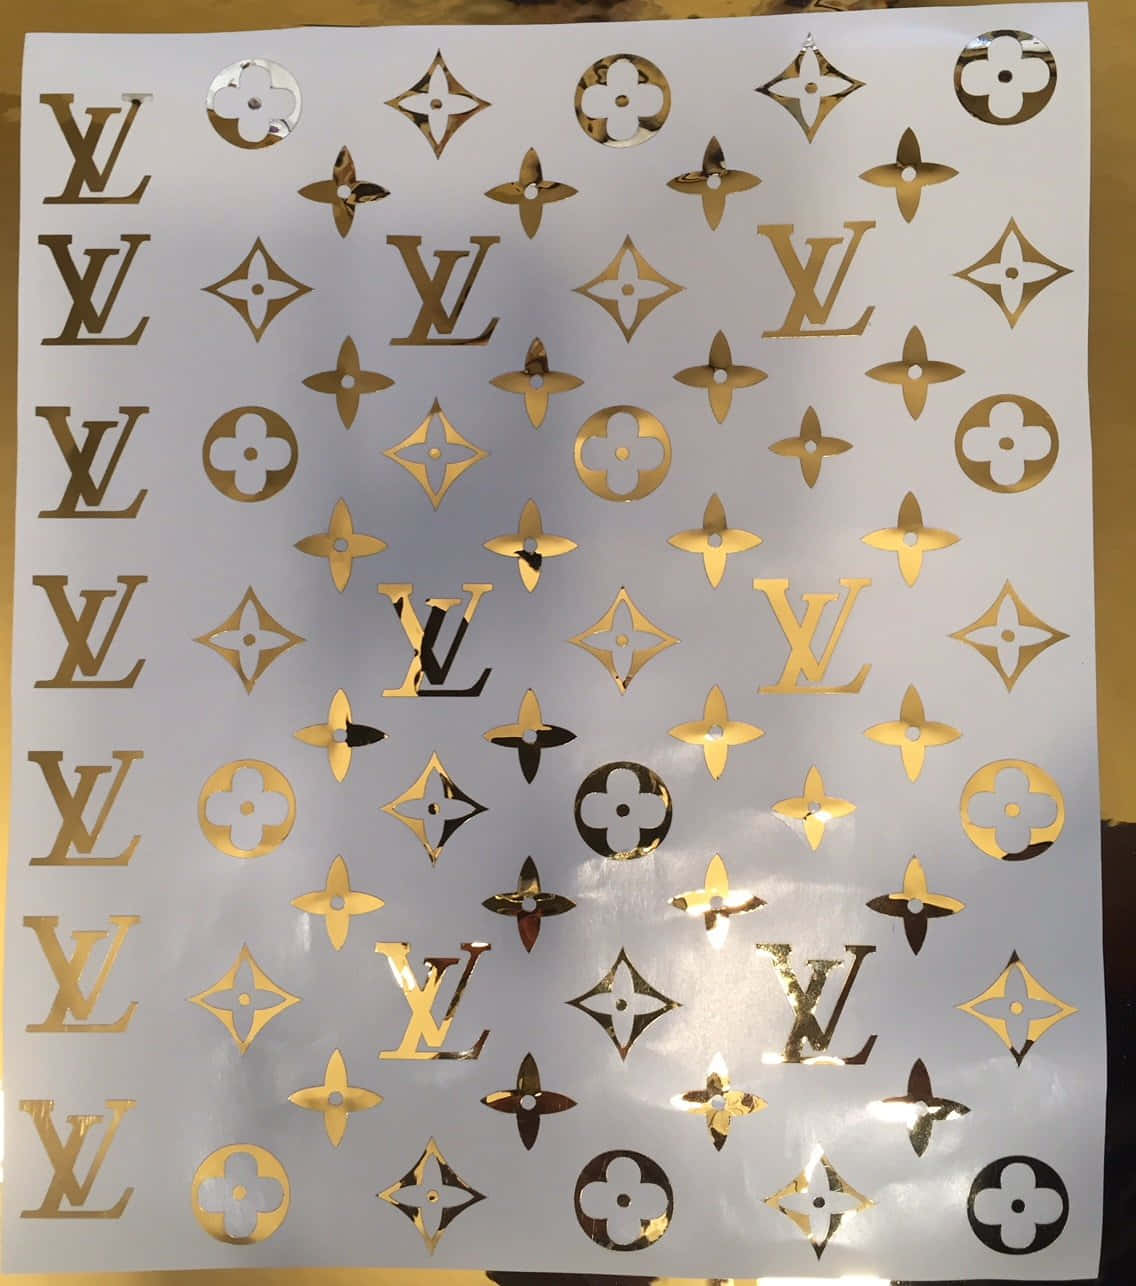 "The Classic and Timeless Louis Vuitton Pattern" Wallpaper